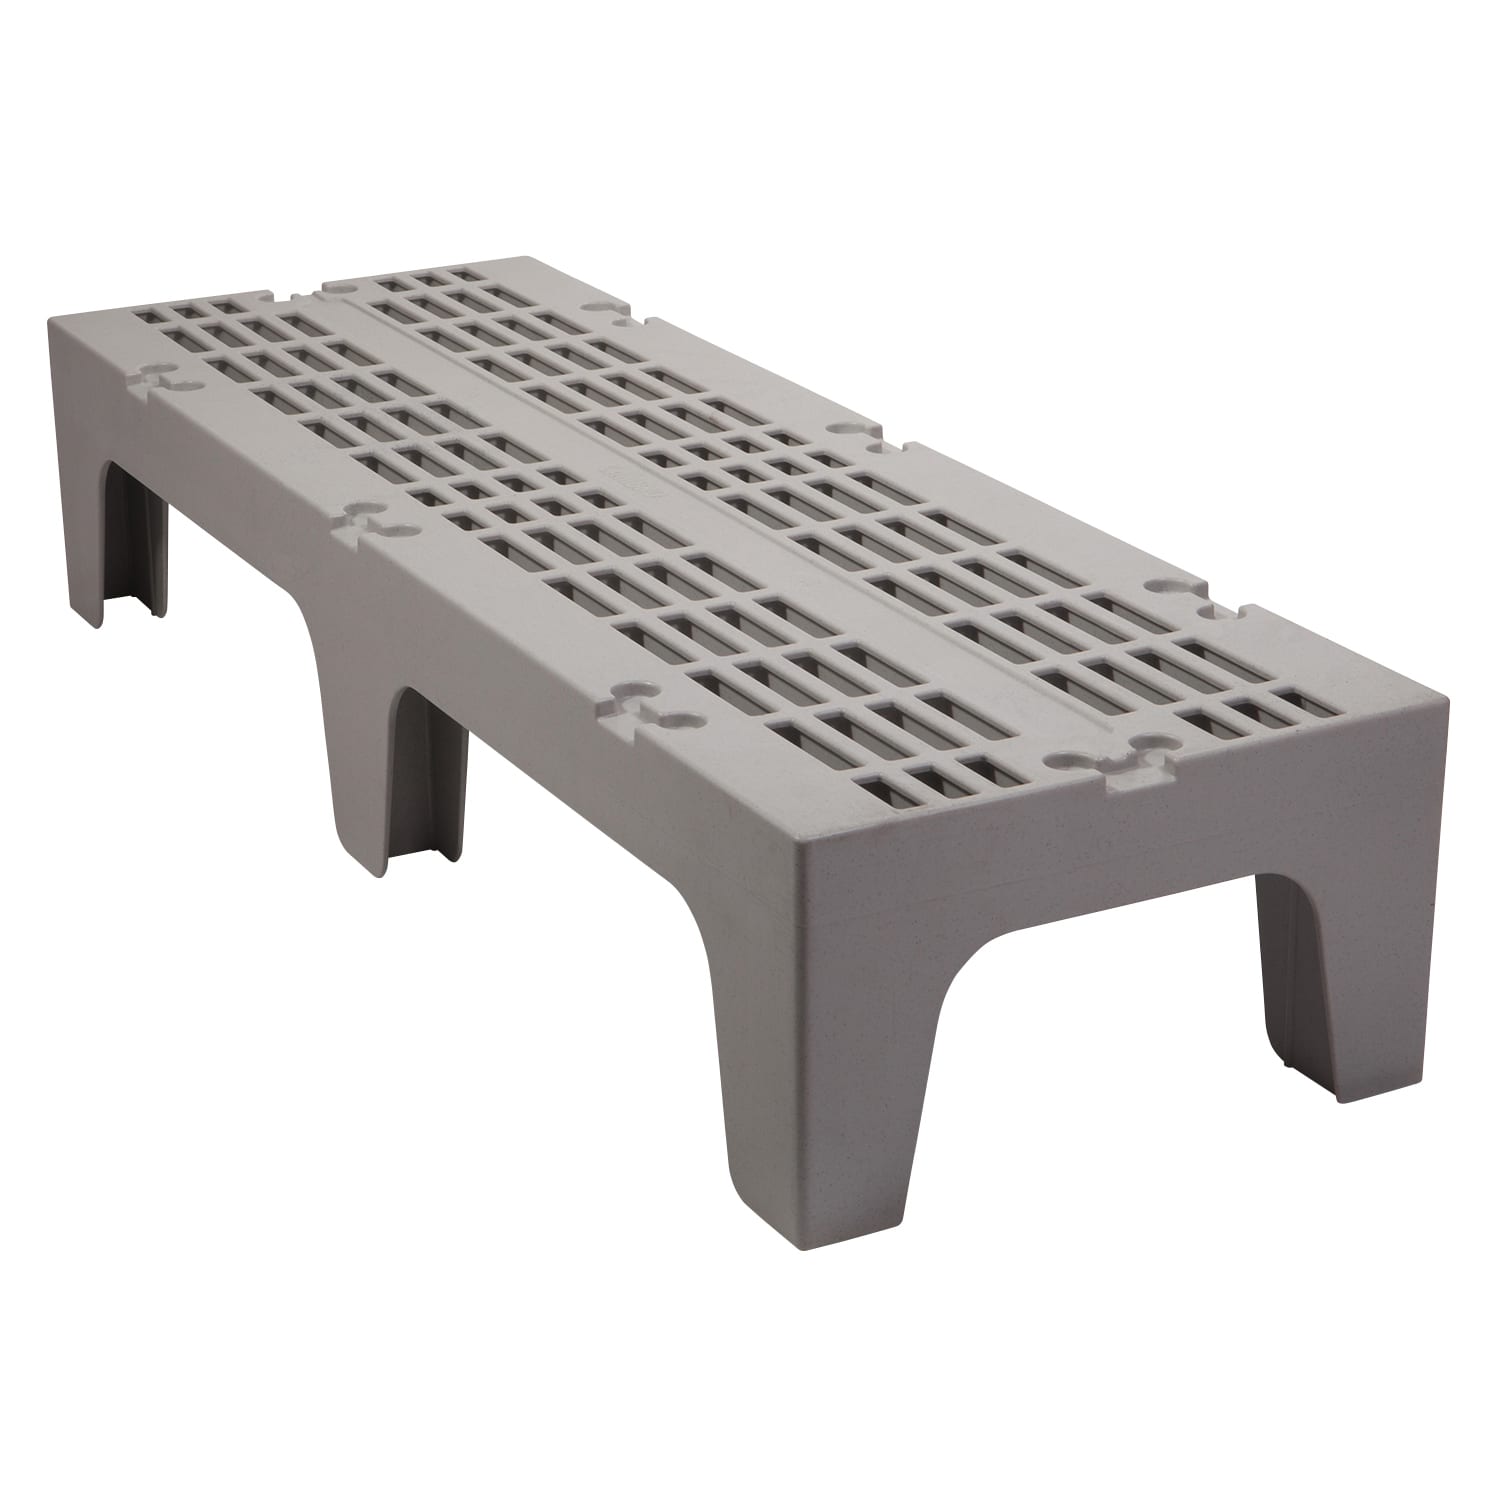 Cambro DRS600480 Sp. Gray 21 x 60 x 12 Slotted Top Dunnage Rack